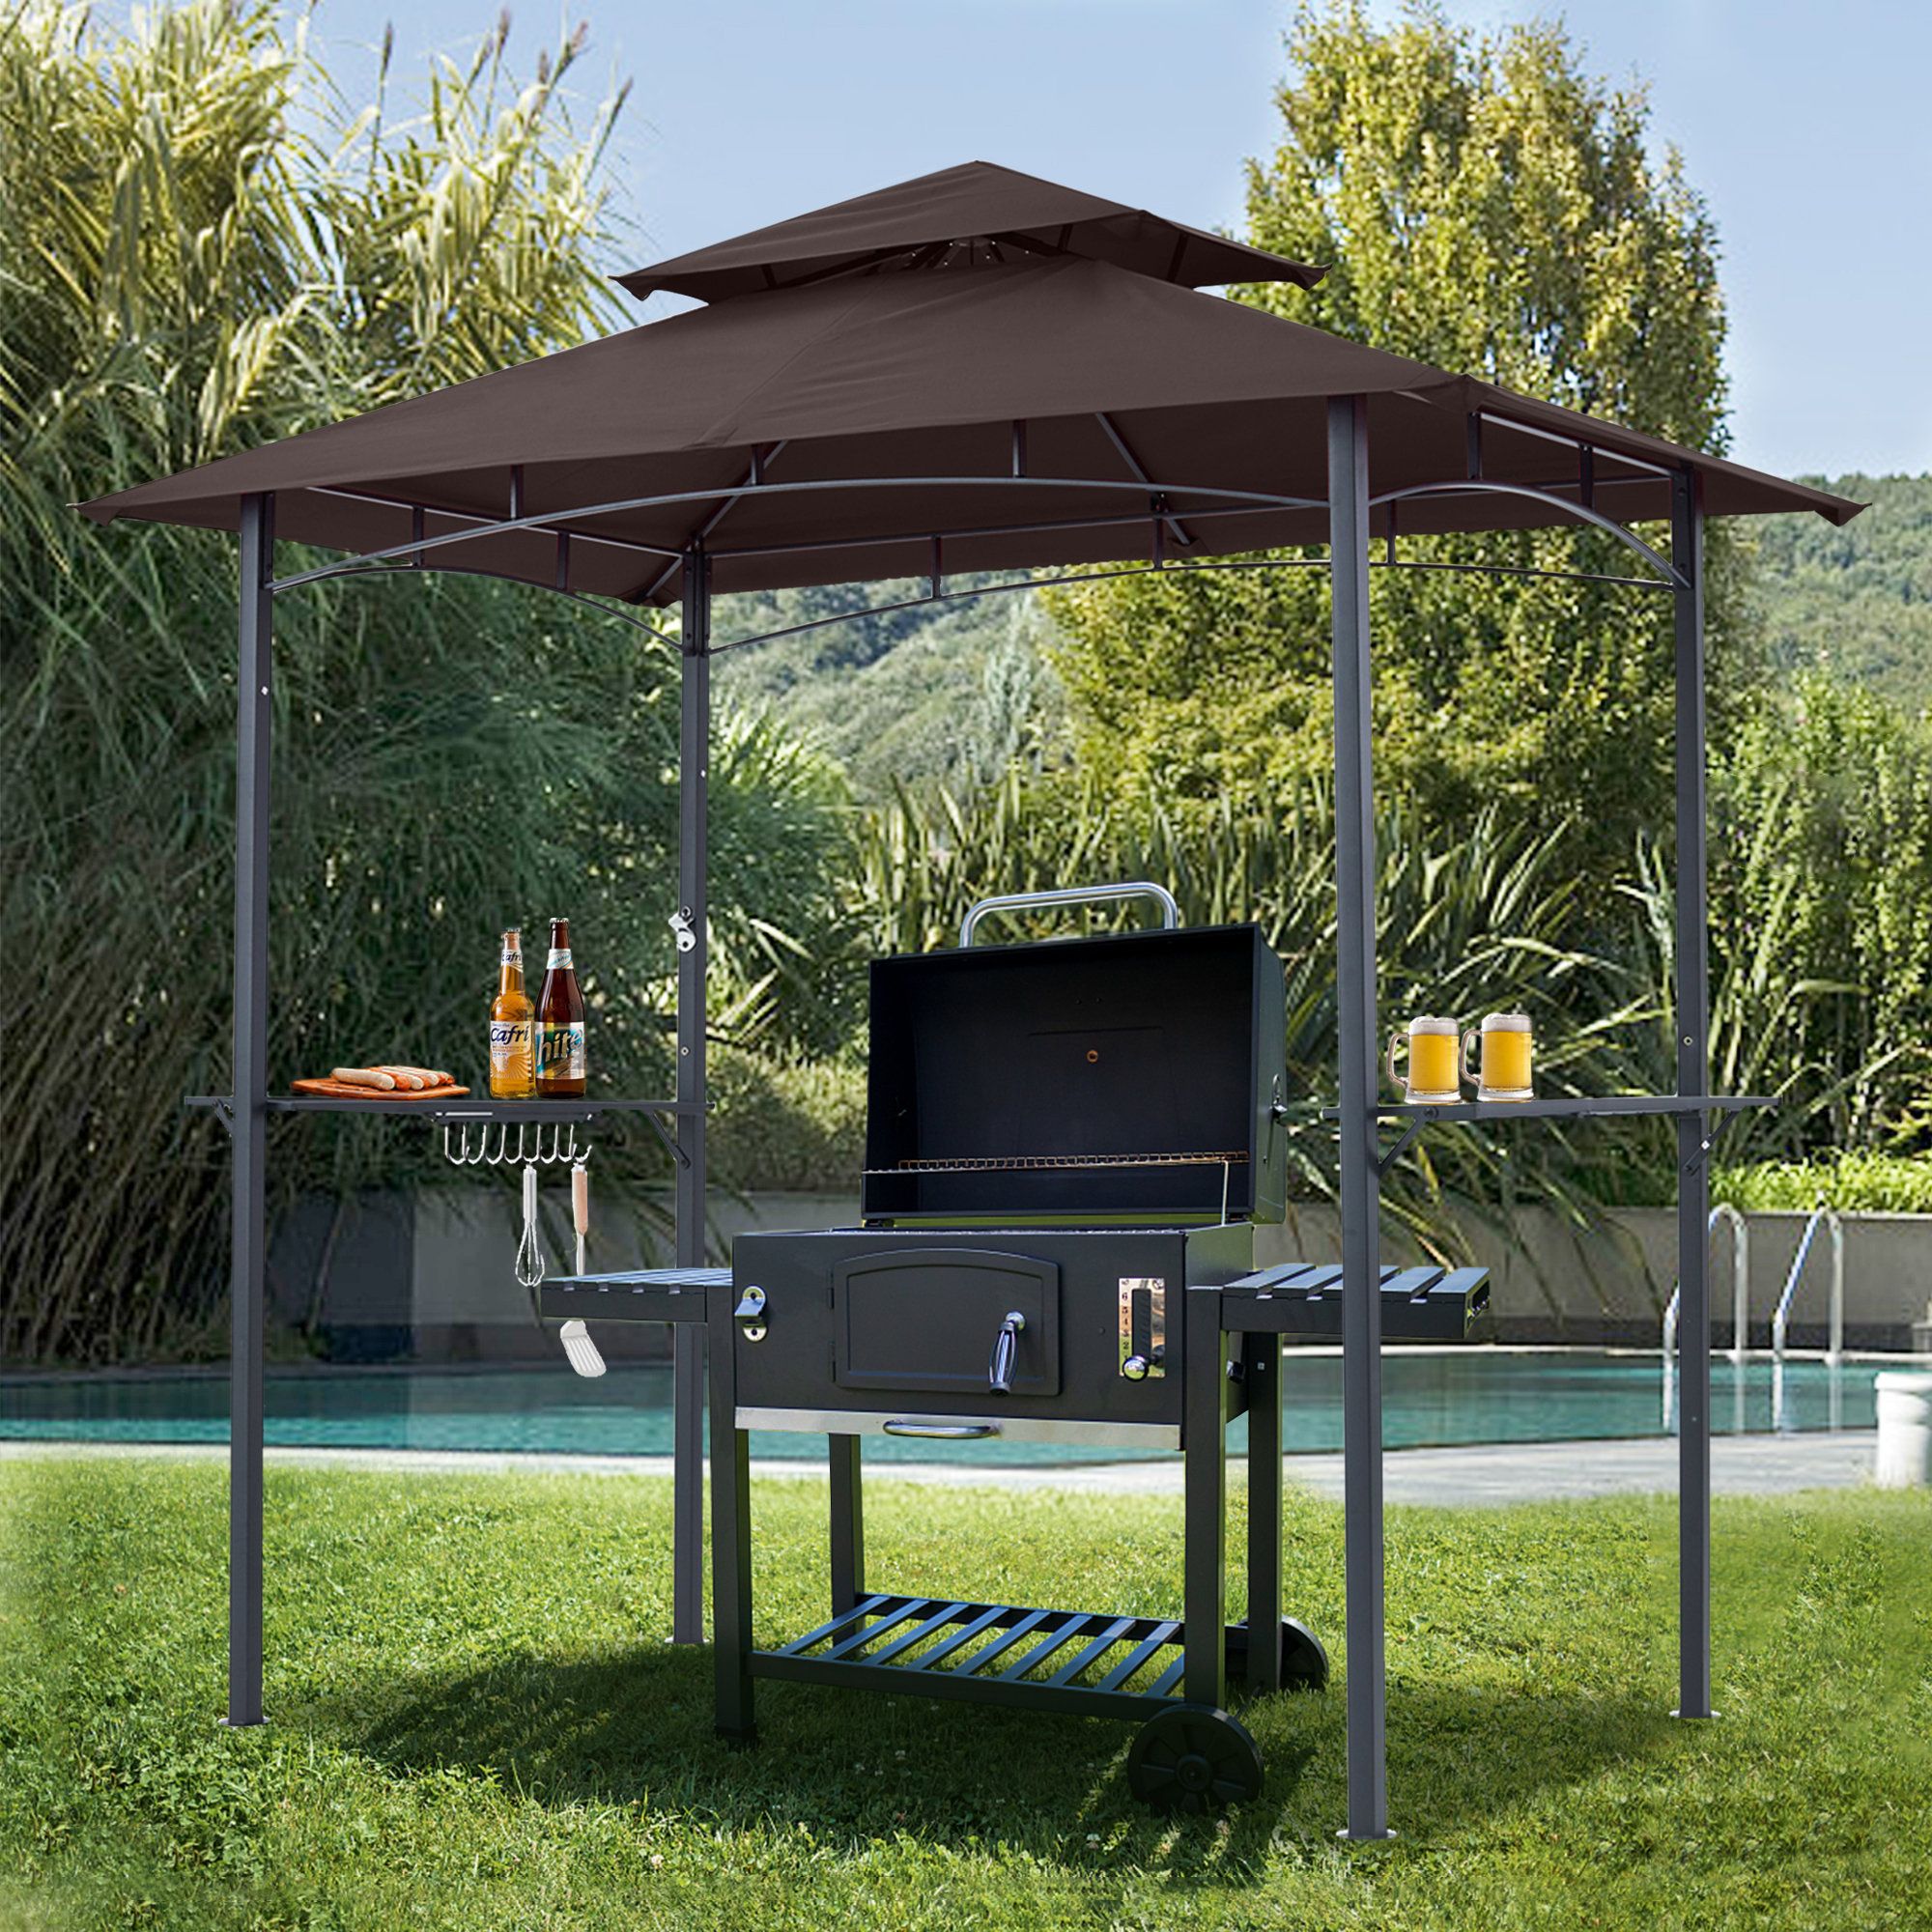 Brown ABCCANOPY 8x 5 Grill Gazebo Double Tiered Outdoor BBQ Gazebo Canopy with LED Light